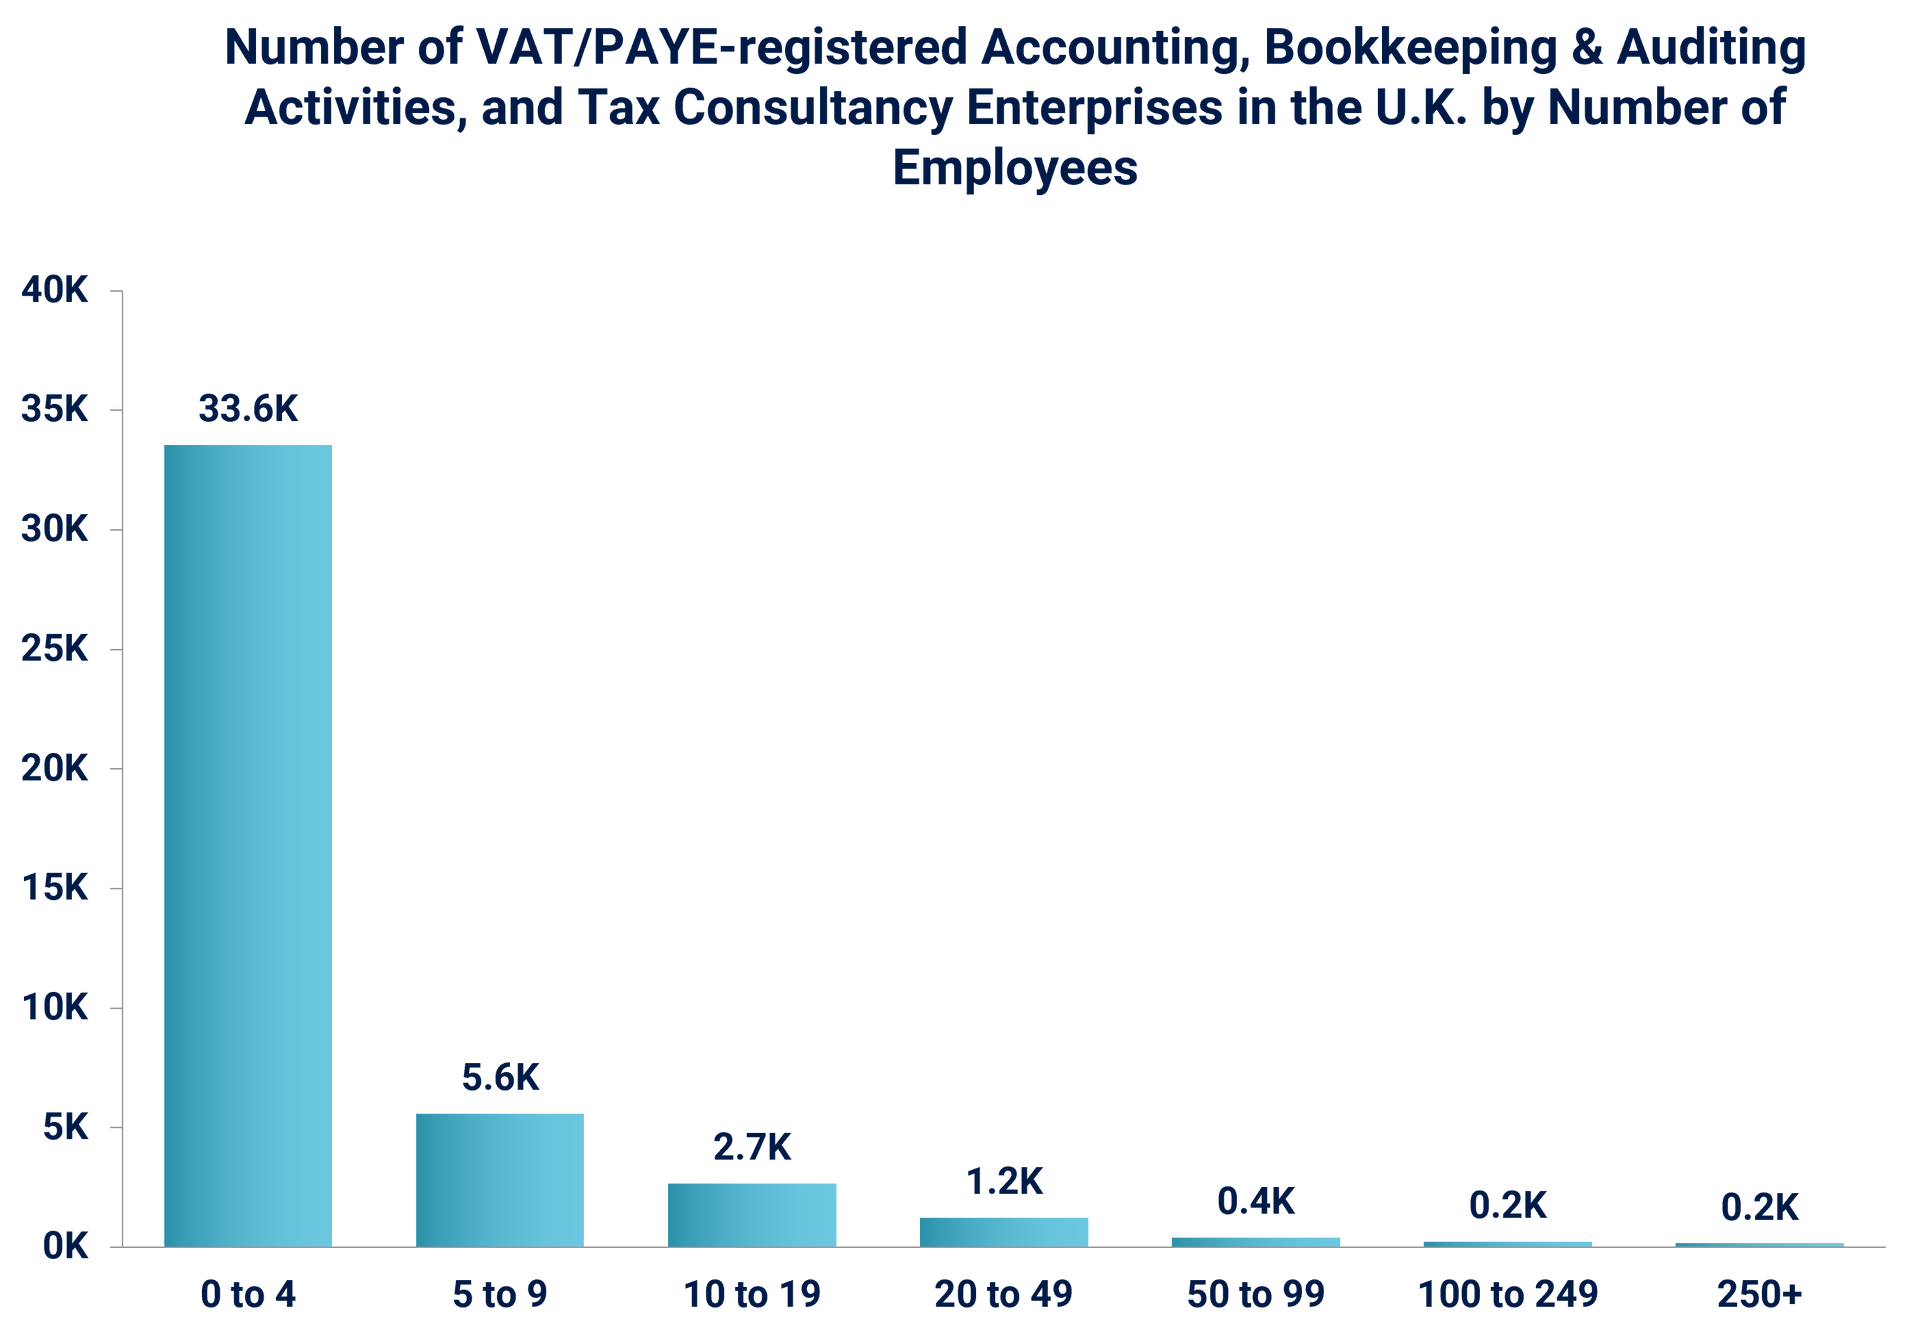 Image showing the number of VAT/PAYE-registered Accounting. Bookkeeping & Auditing Activities, and Tax Consultancy Enterprises in the U.K. by Number of Employees